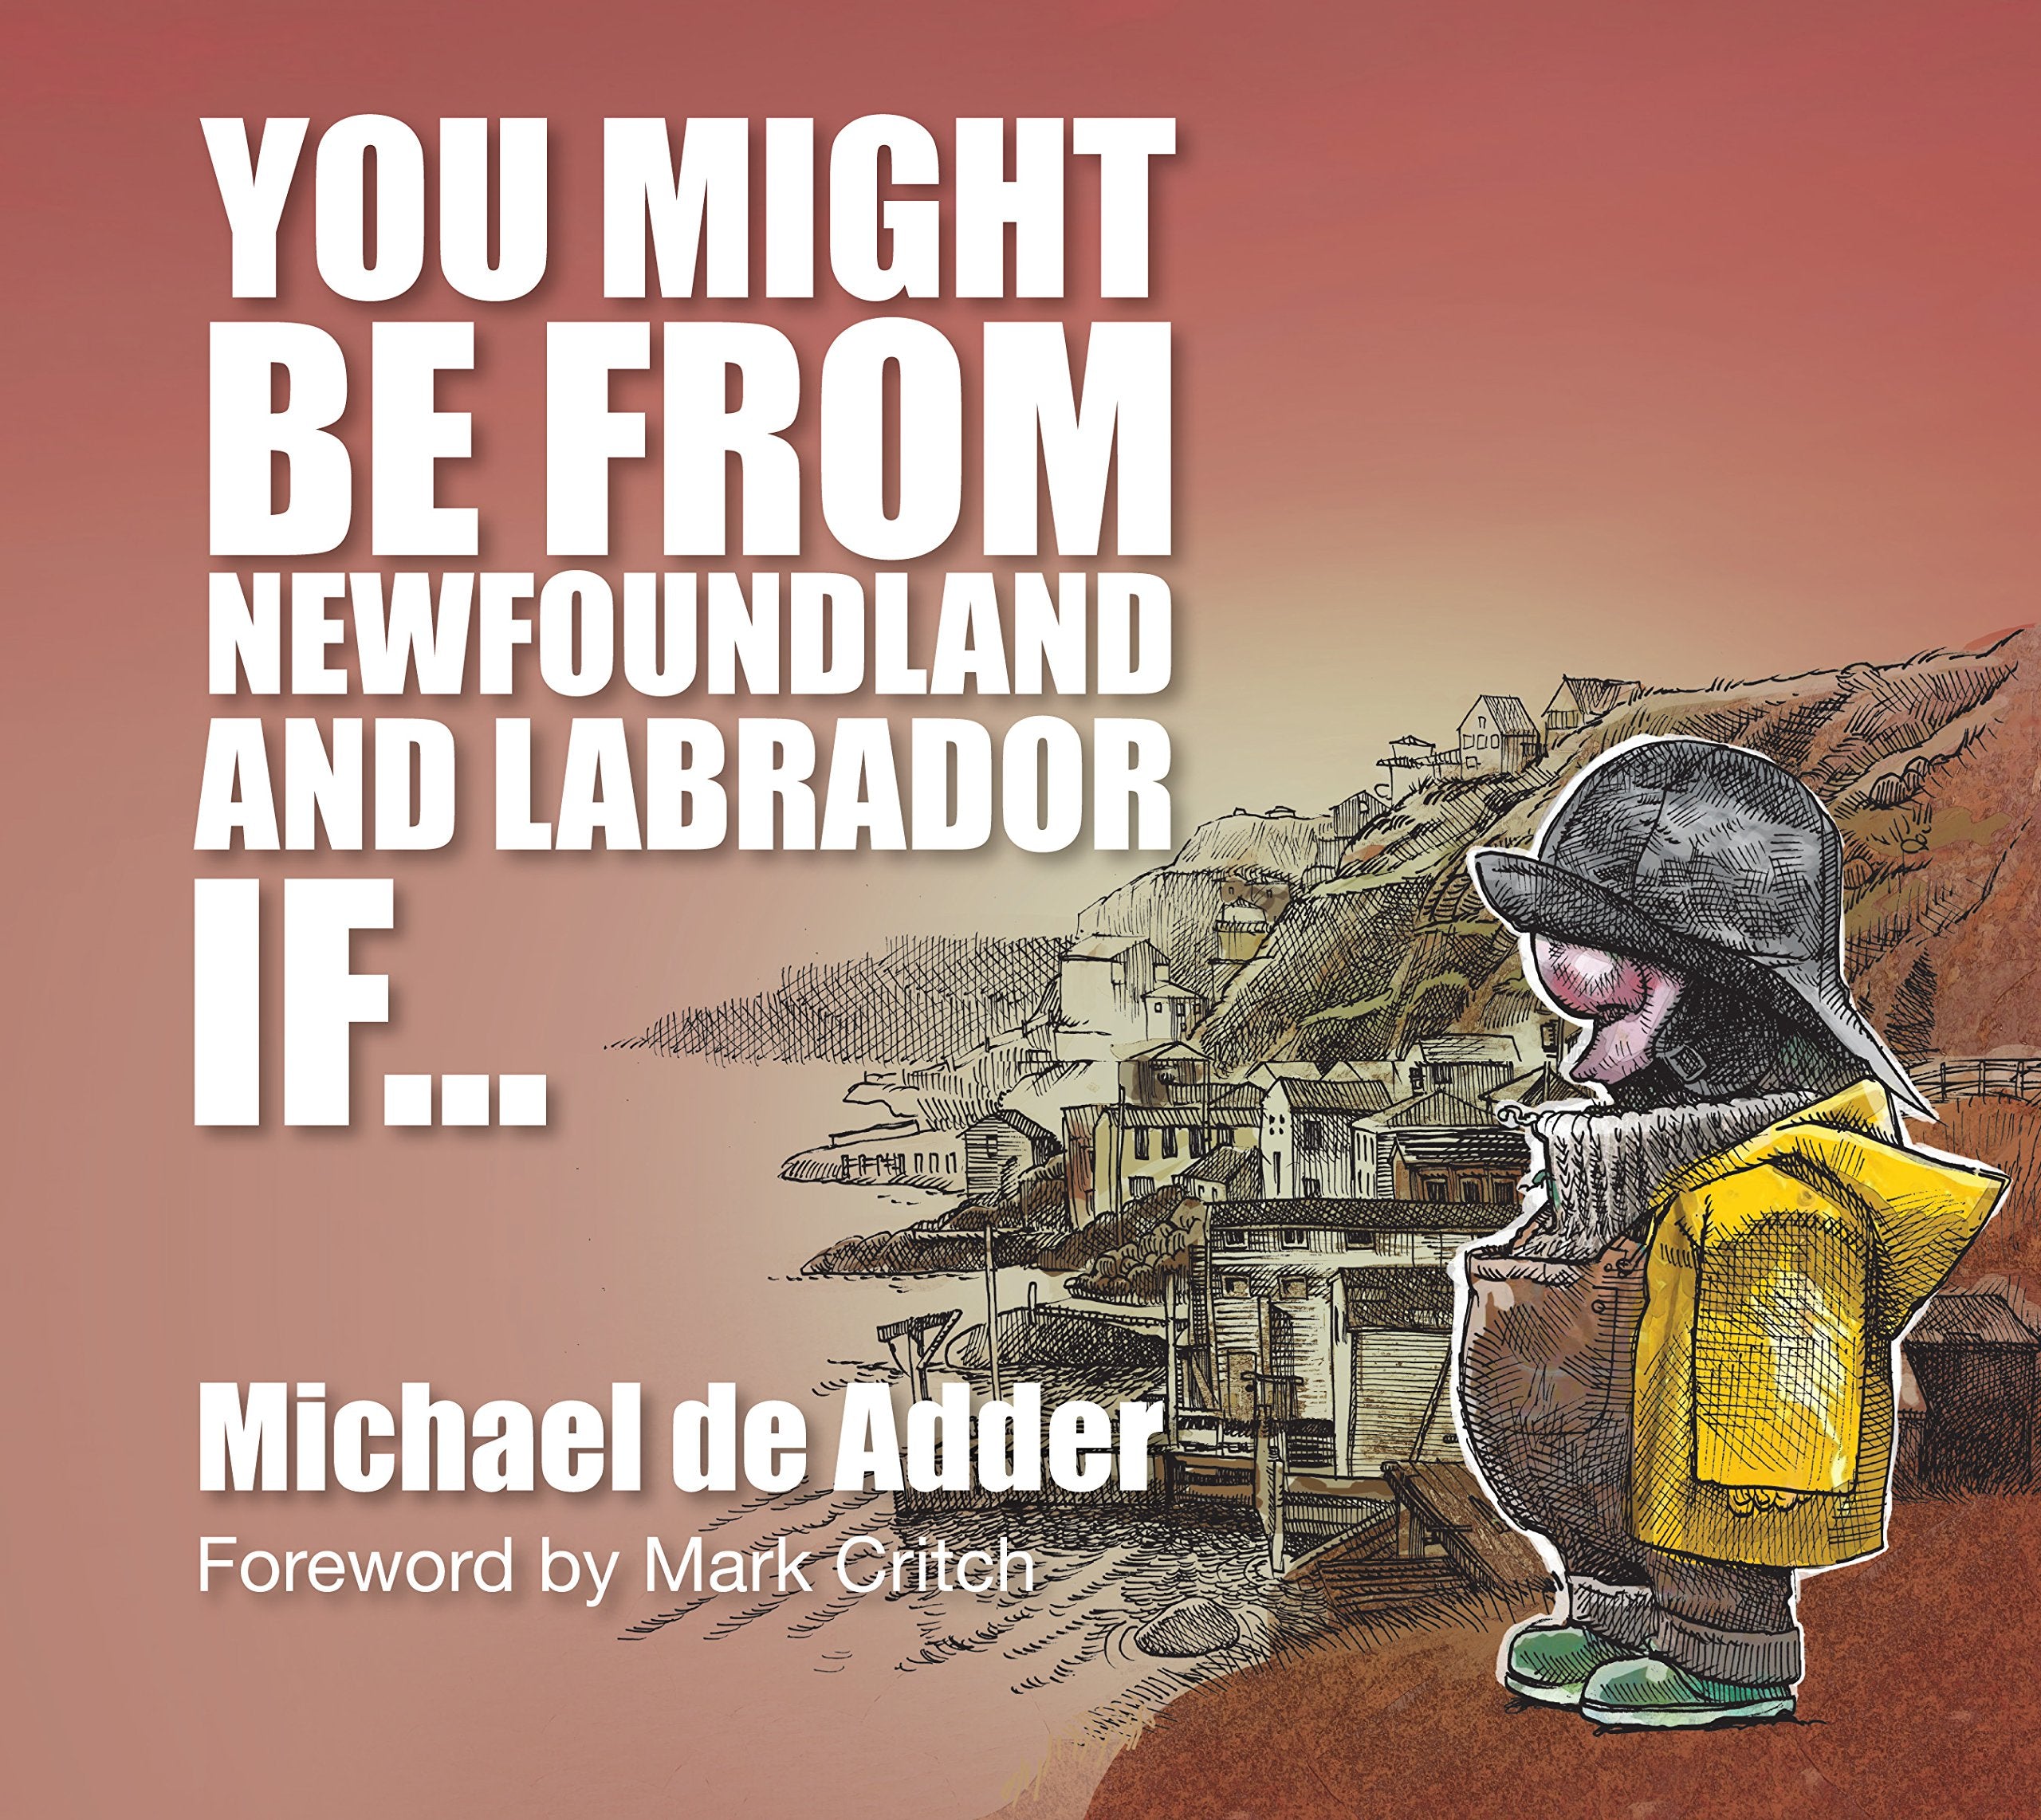 You Might Be From Newfoundland If...